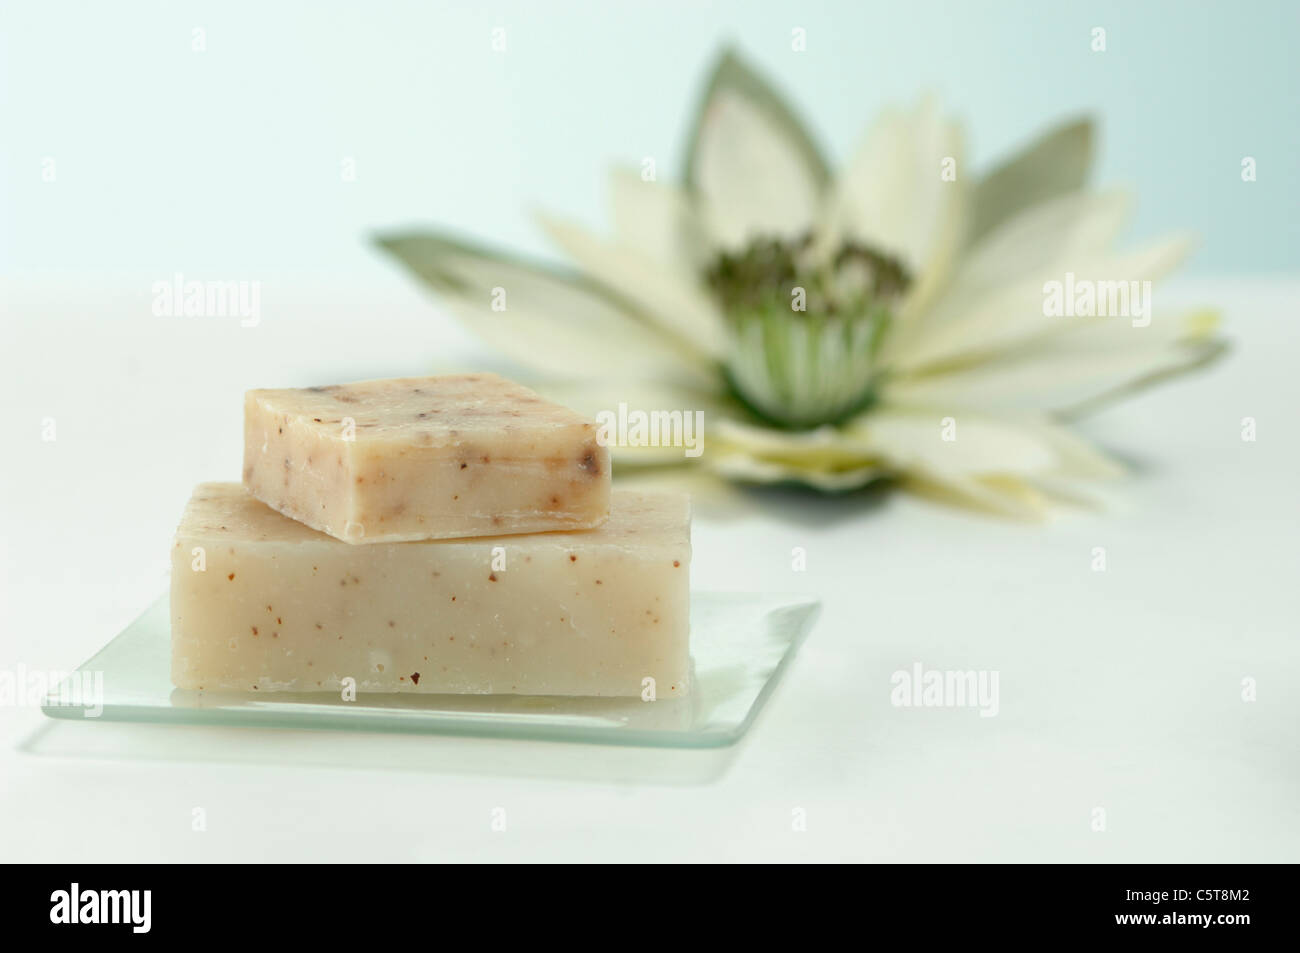 Bars of soap on soap dish, water lily in background, close up Stock Photo